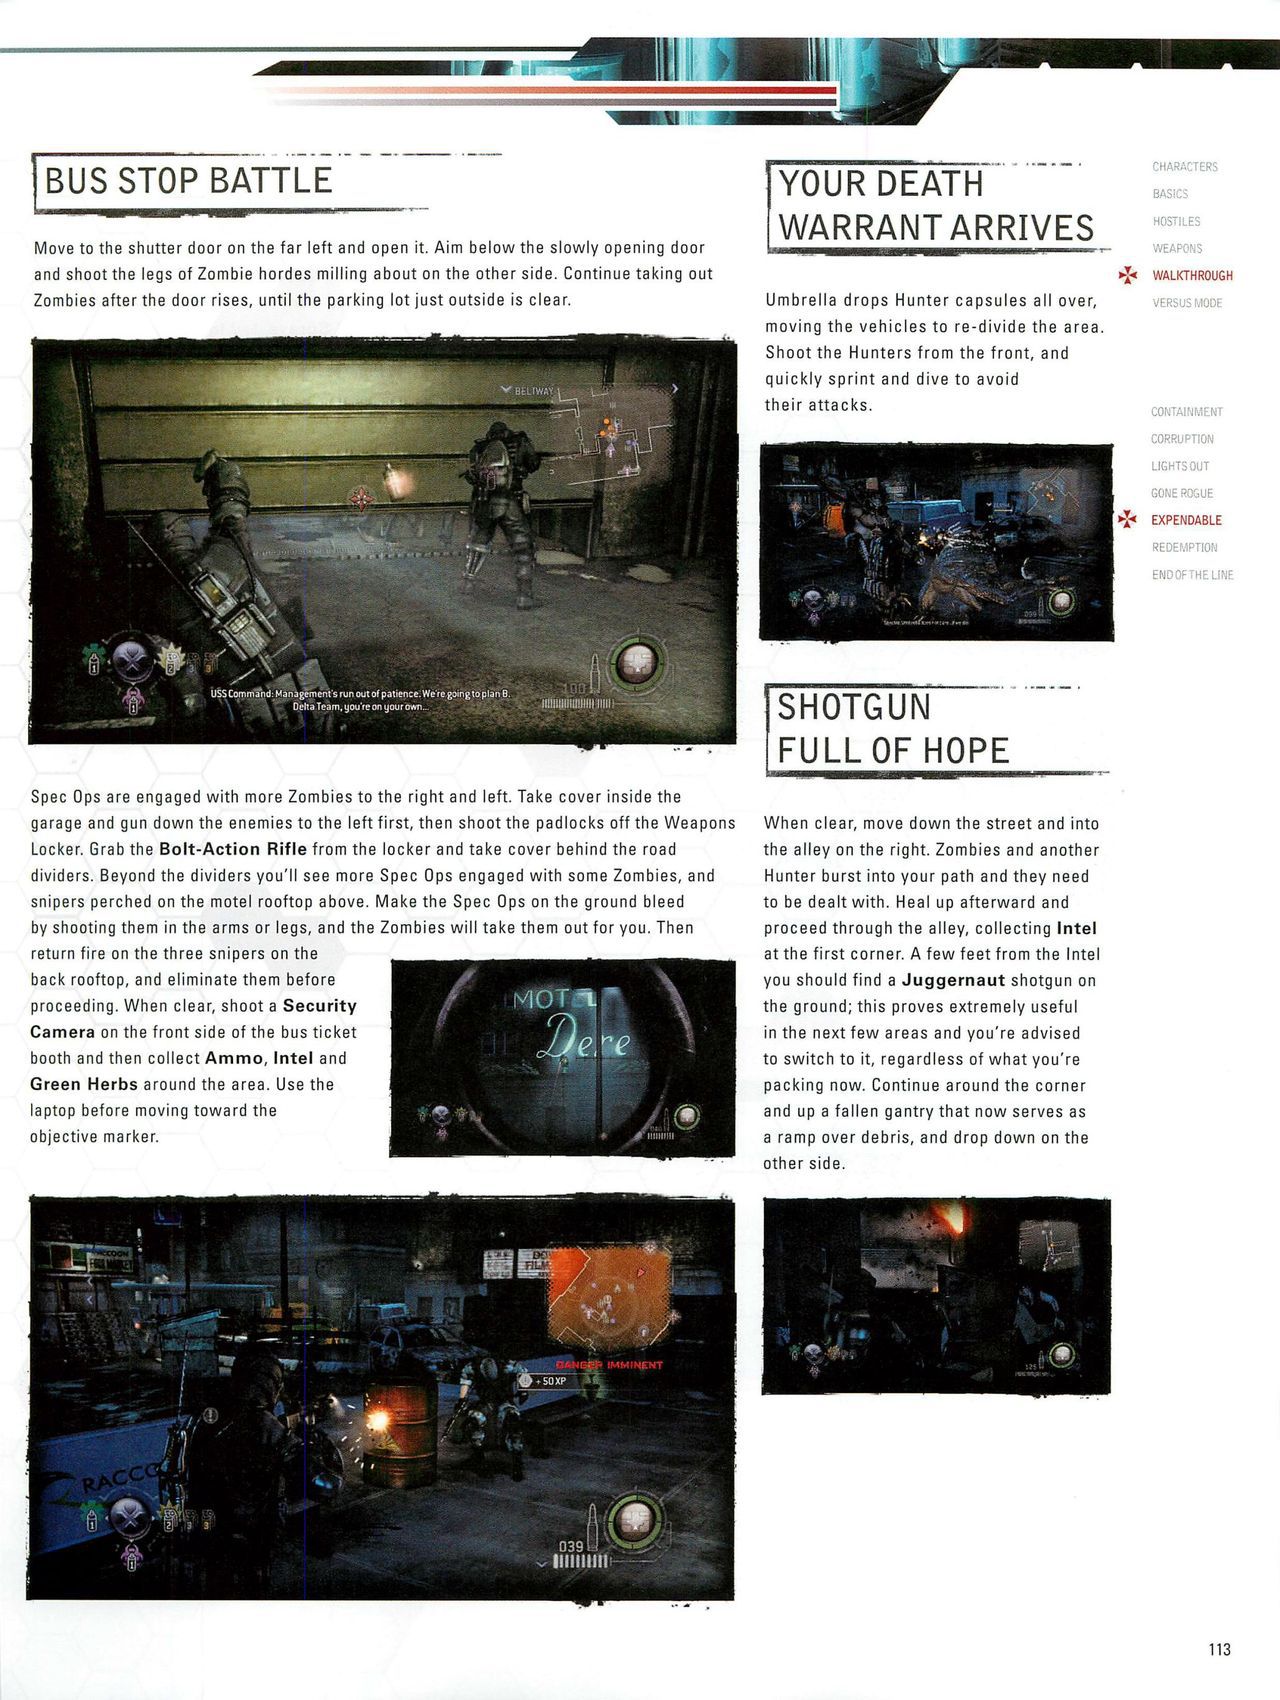 Resident Evil: Operation Raccoon City Official Strategy Guide (watermarked) 115